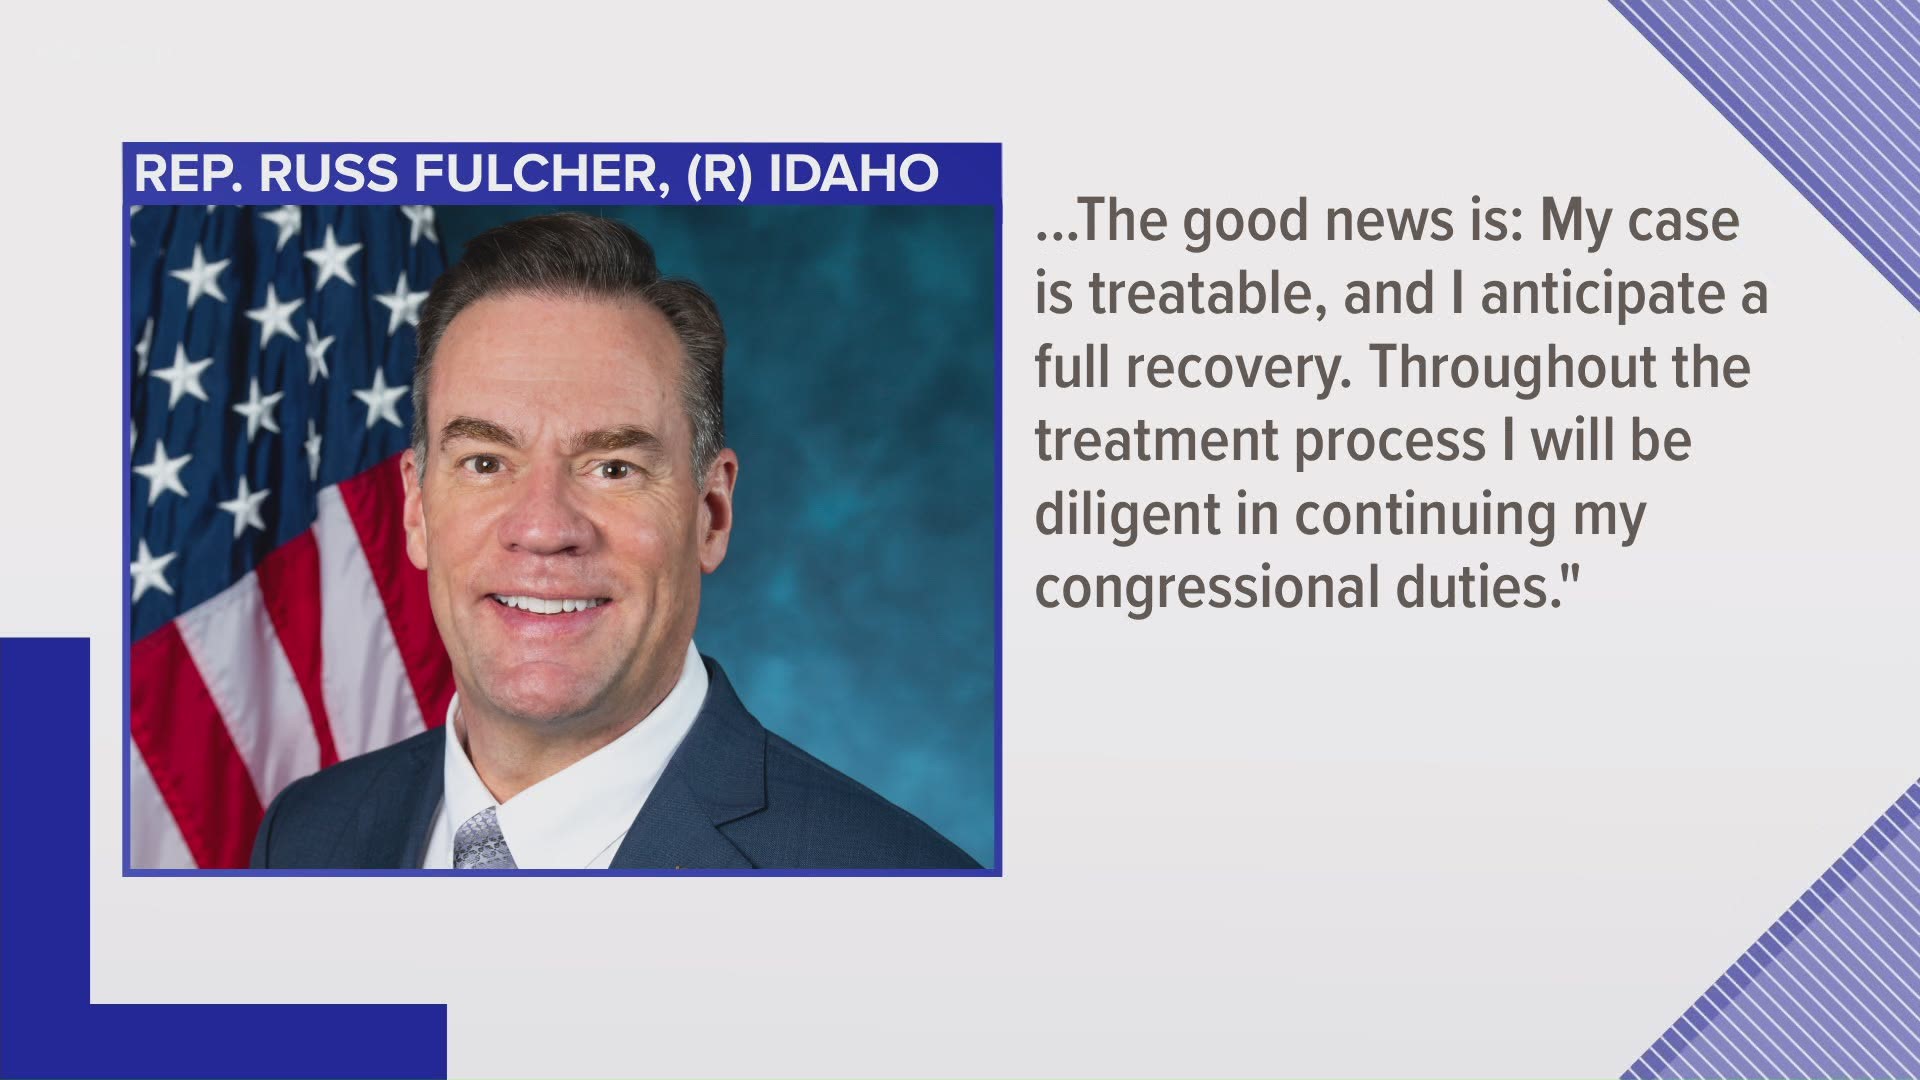 Rep. Fulcher said that his case is treatable and he is expected to make a full recovery.